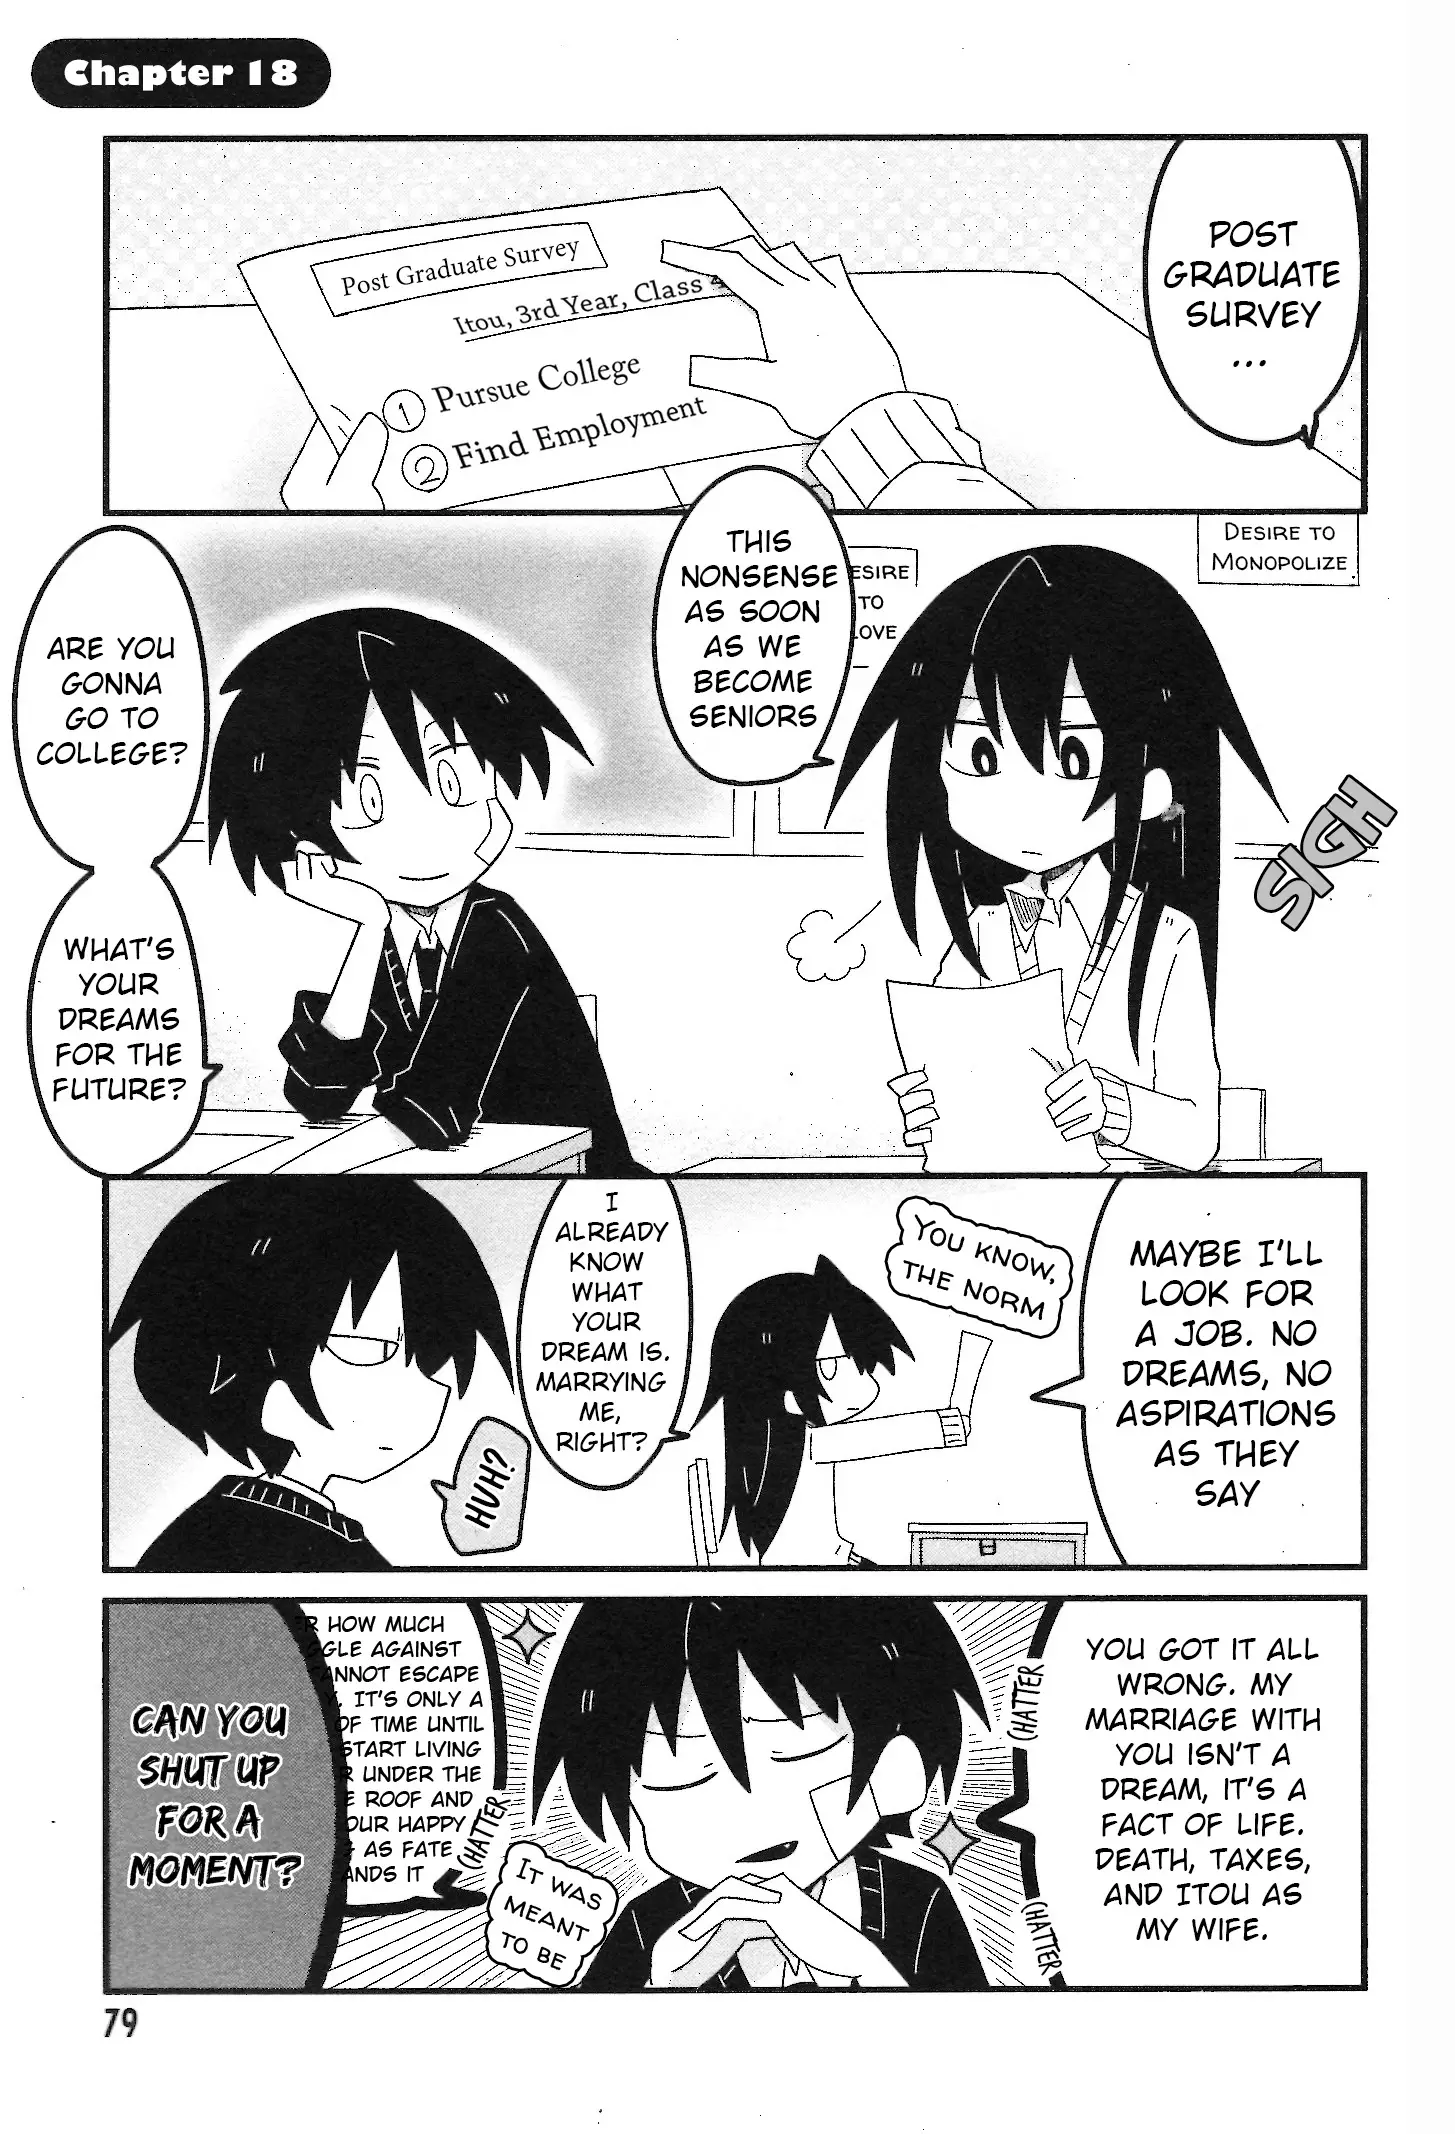 Why Naitou - 31 page 1-4f66819c